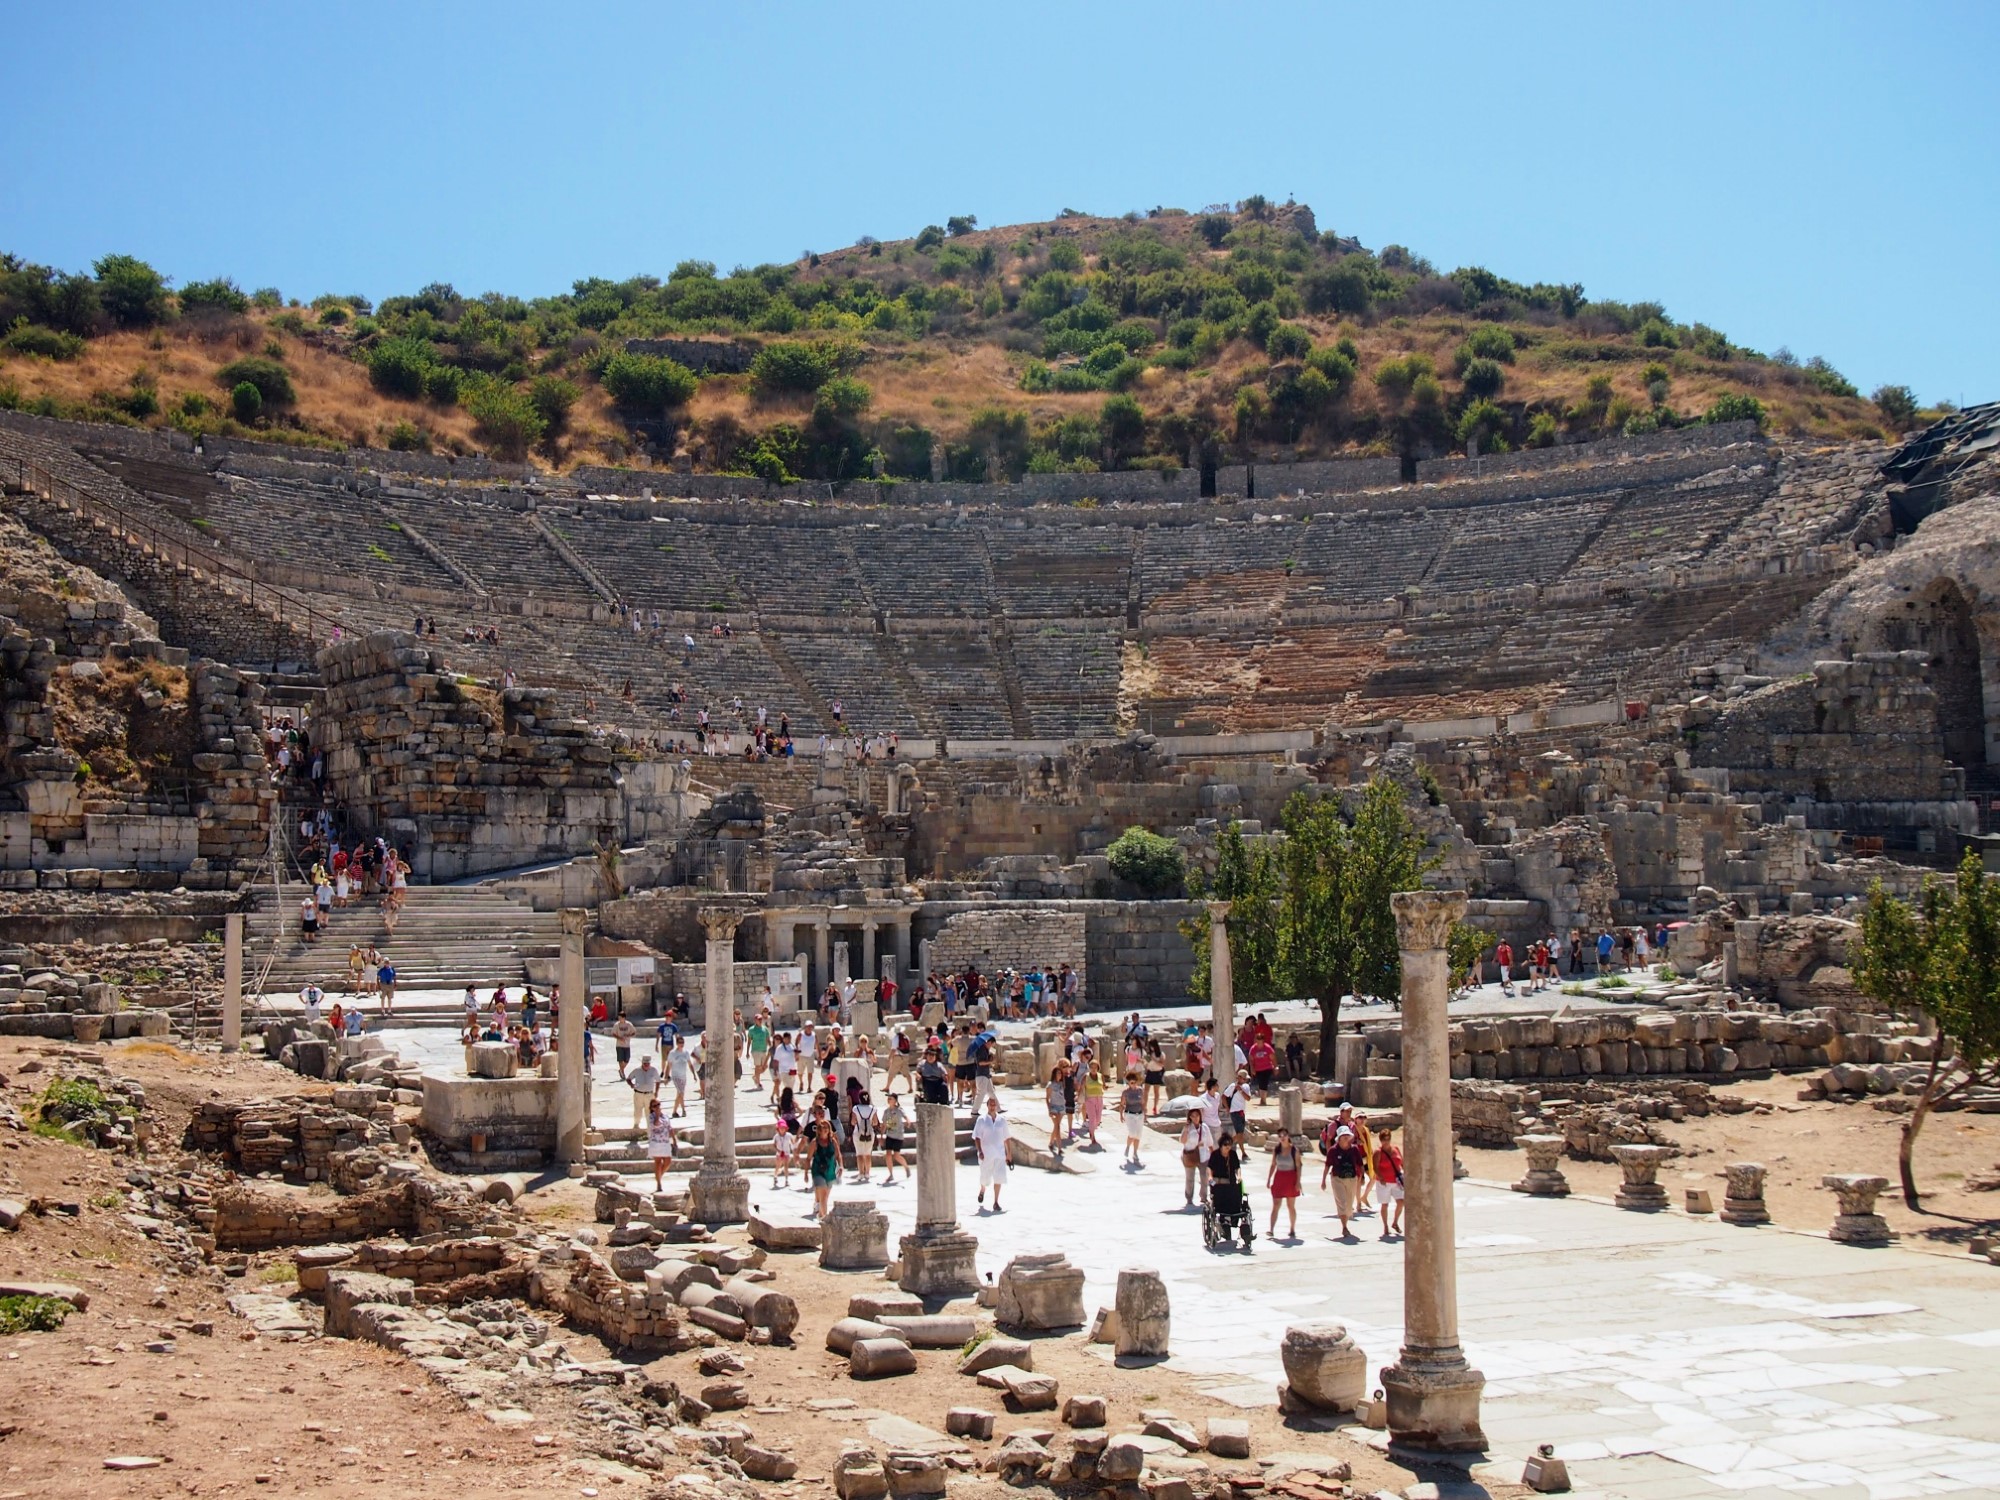 View of the ruins of a multi-storey ancient theatre at Ephesus, with people walking along a paved pathway flanked with columns in front